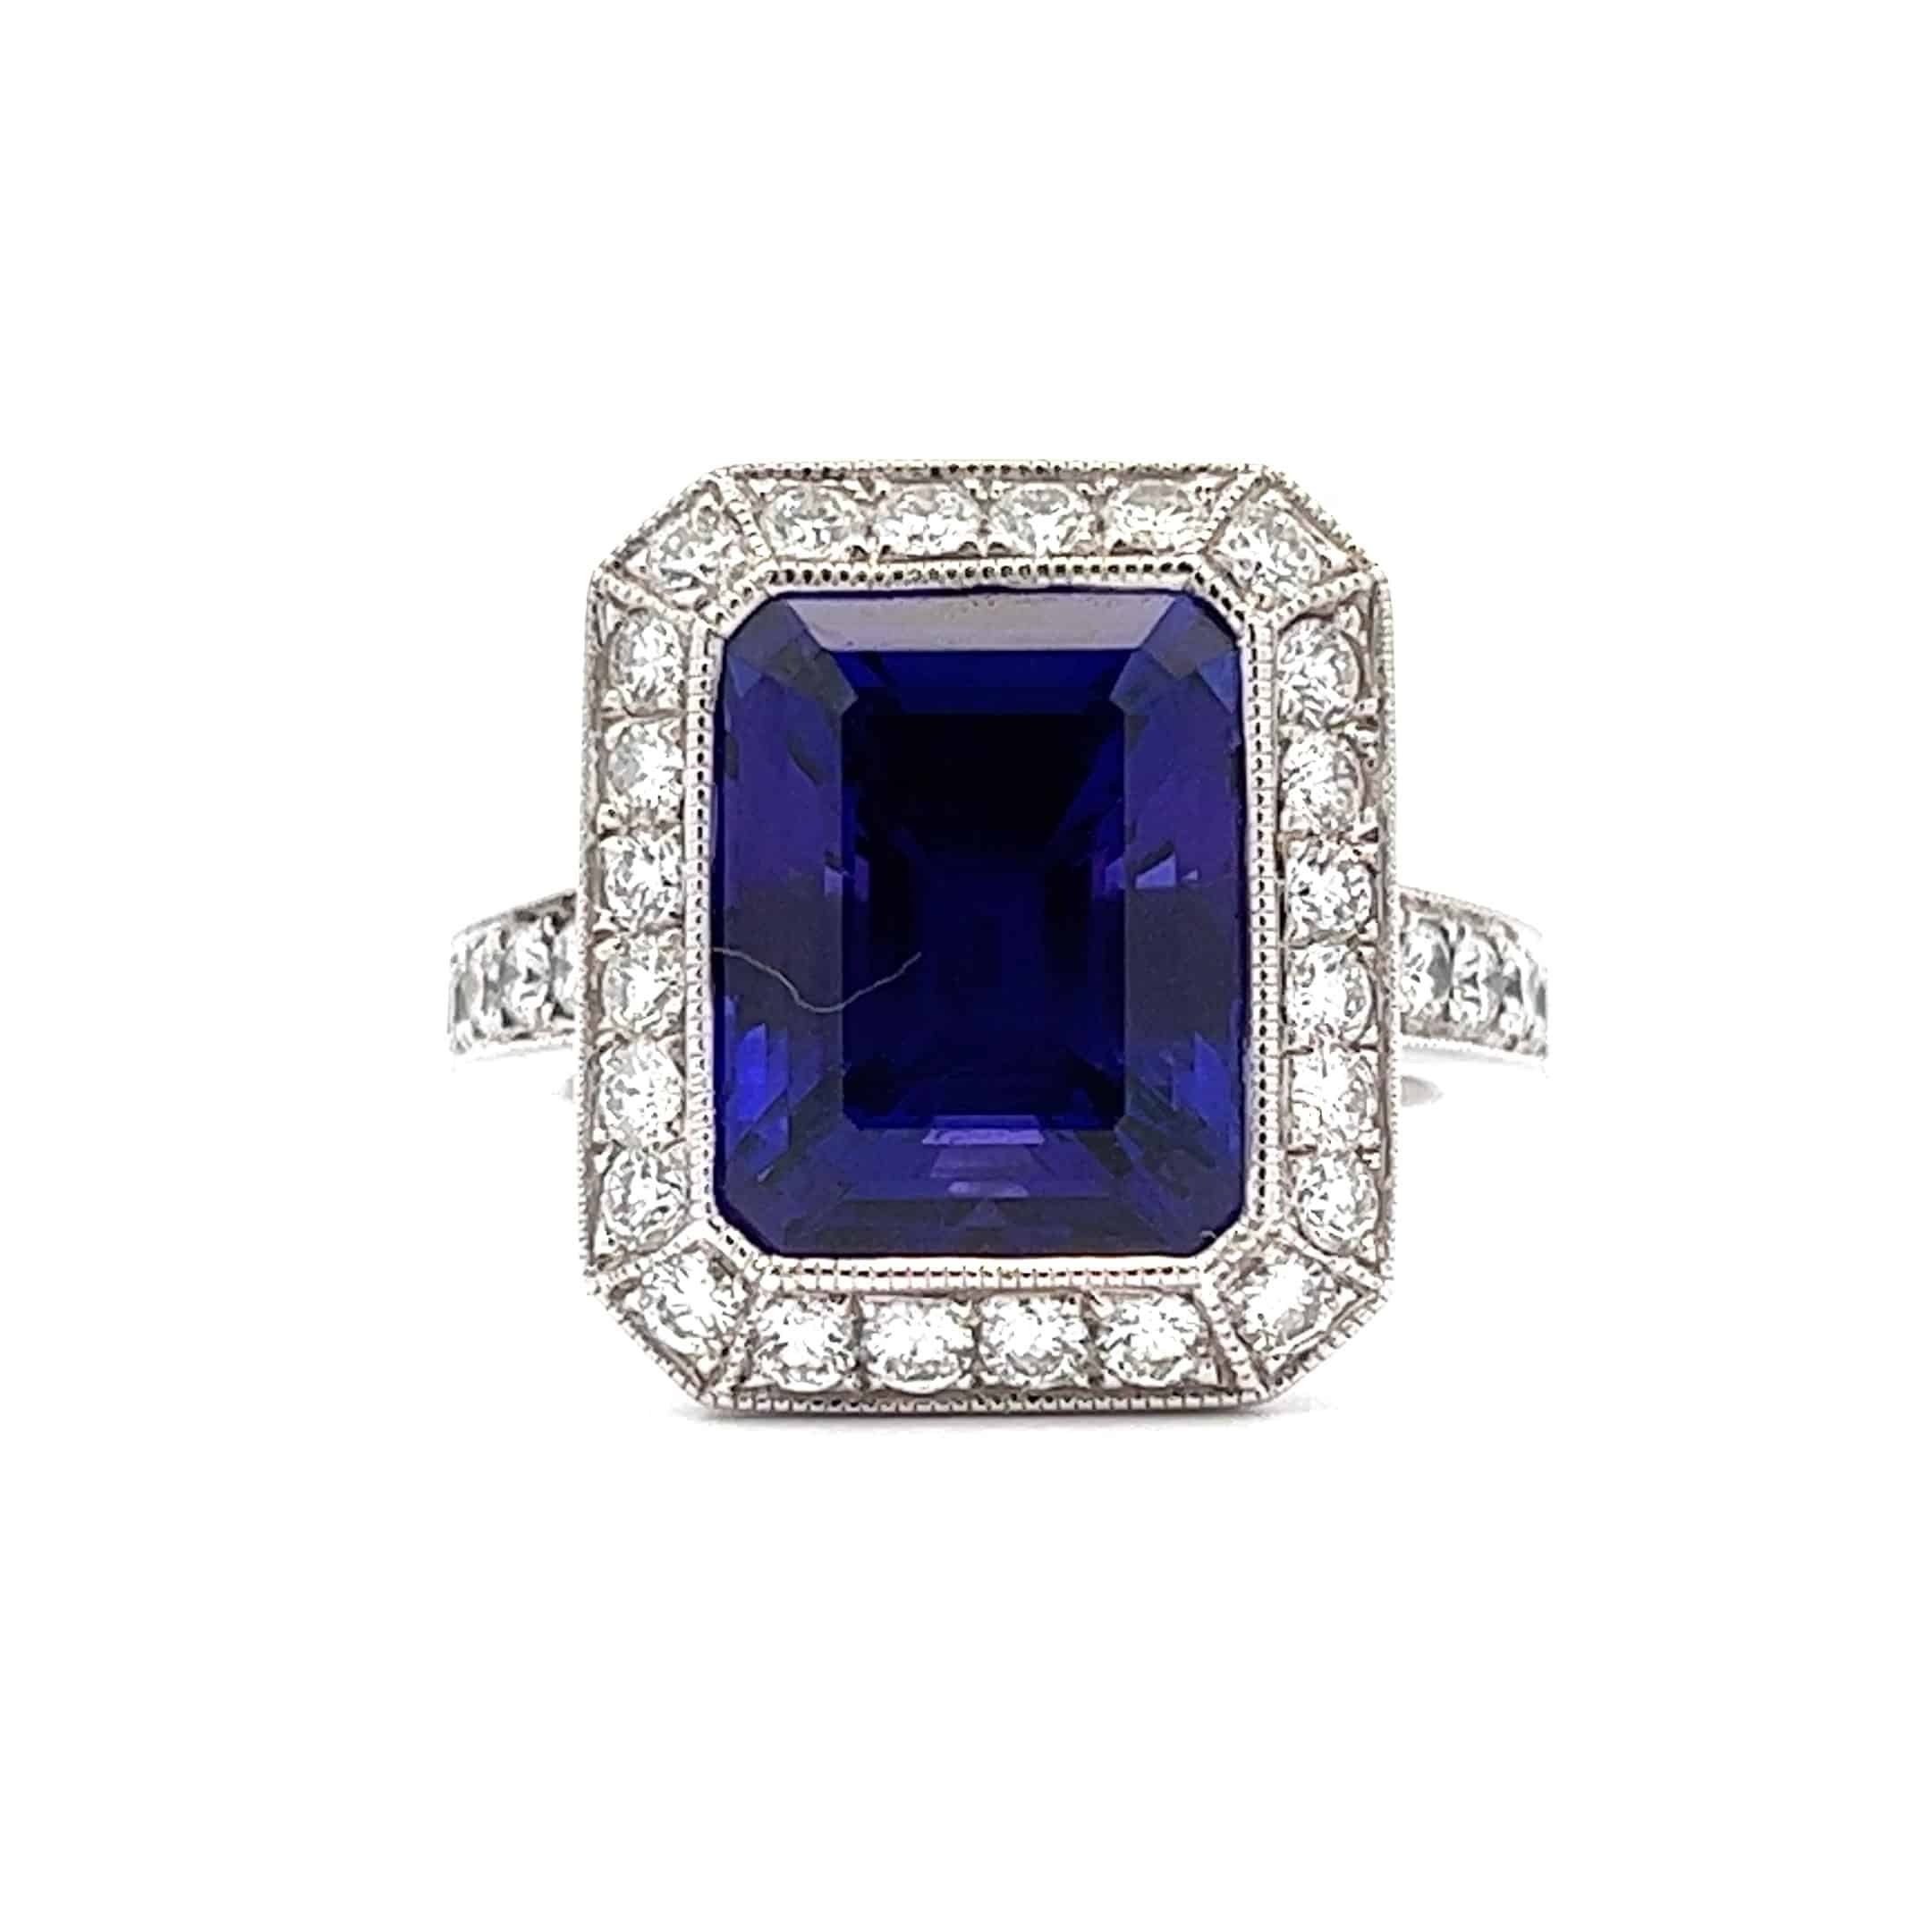 Preowned Platinum 8.98ct AAAA Emerald Cut Tanzanite and Diamond Ring – 1.19ct Total Diamond Weight